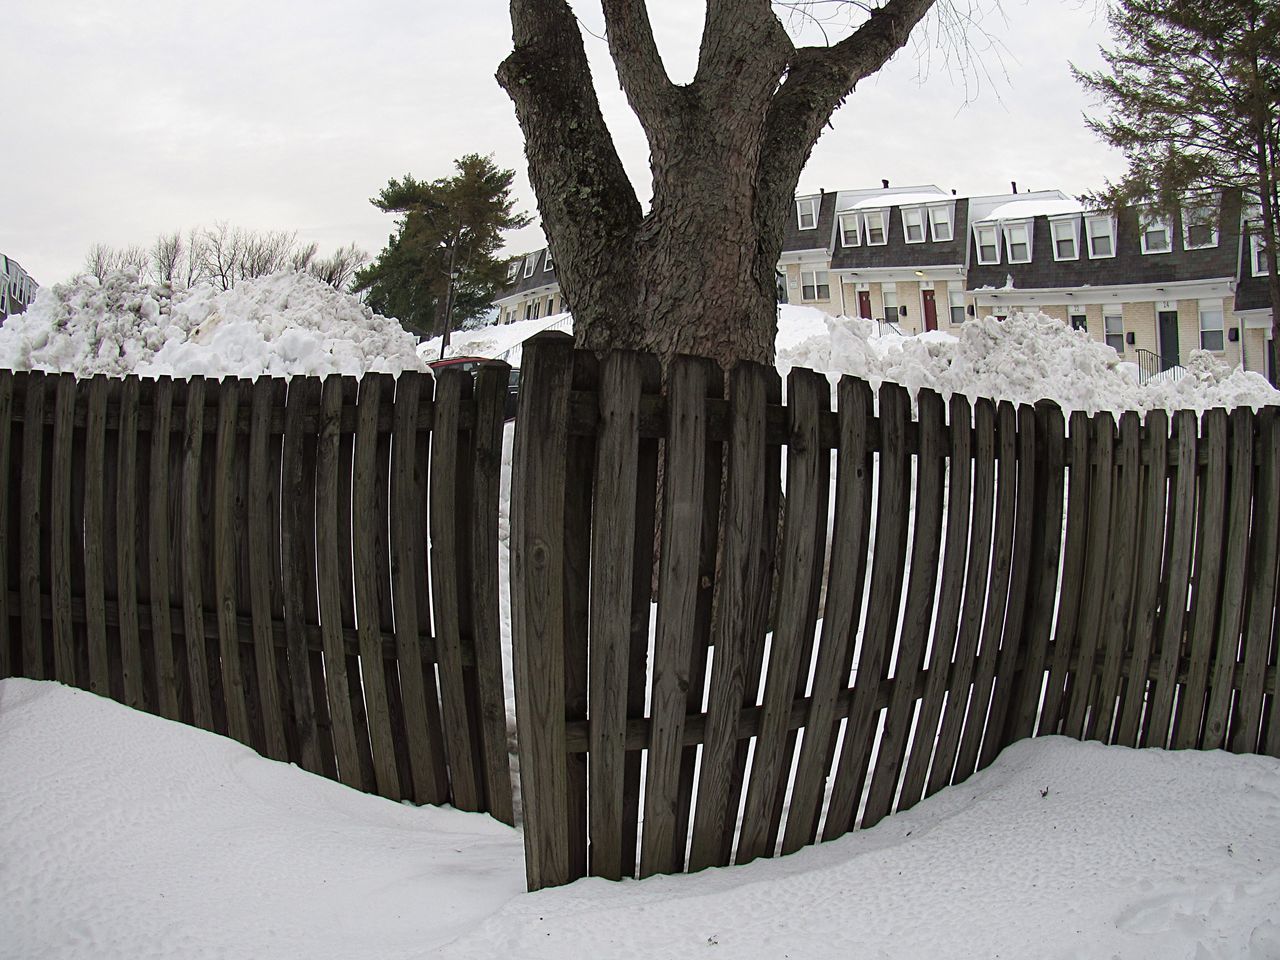 snow, winter, cold temperature, season, fence, tree, built structure, weather, architecture, covering, sky, building exterior, wood - material, field, nature, tranquility, protection, landscape, frozen, white color